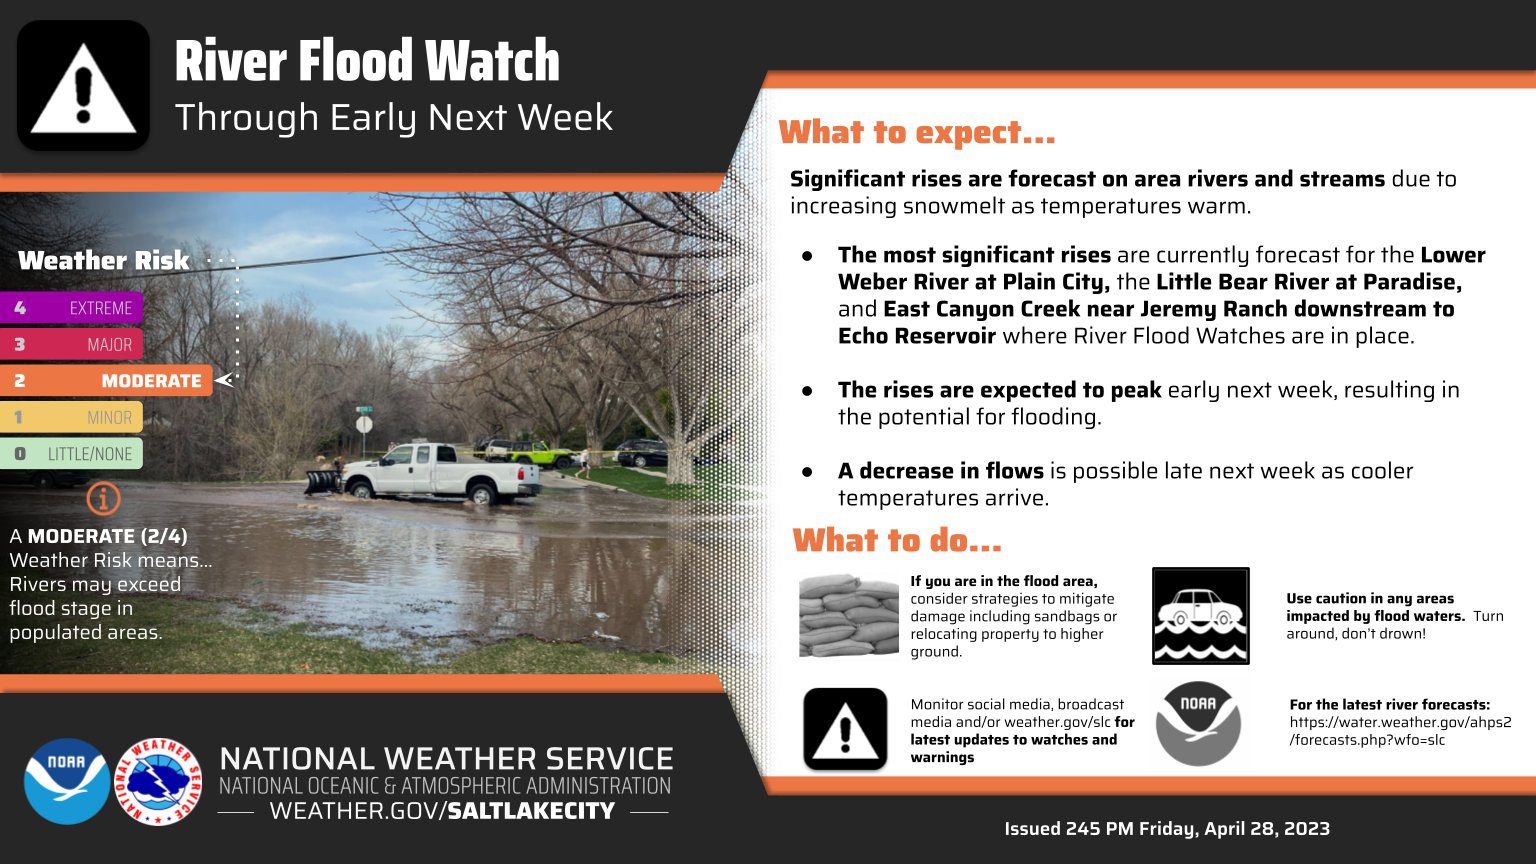 Flood Watch issued for several locations in Utah through early next week.